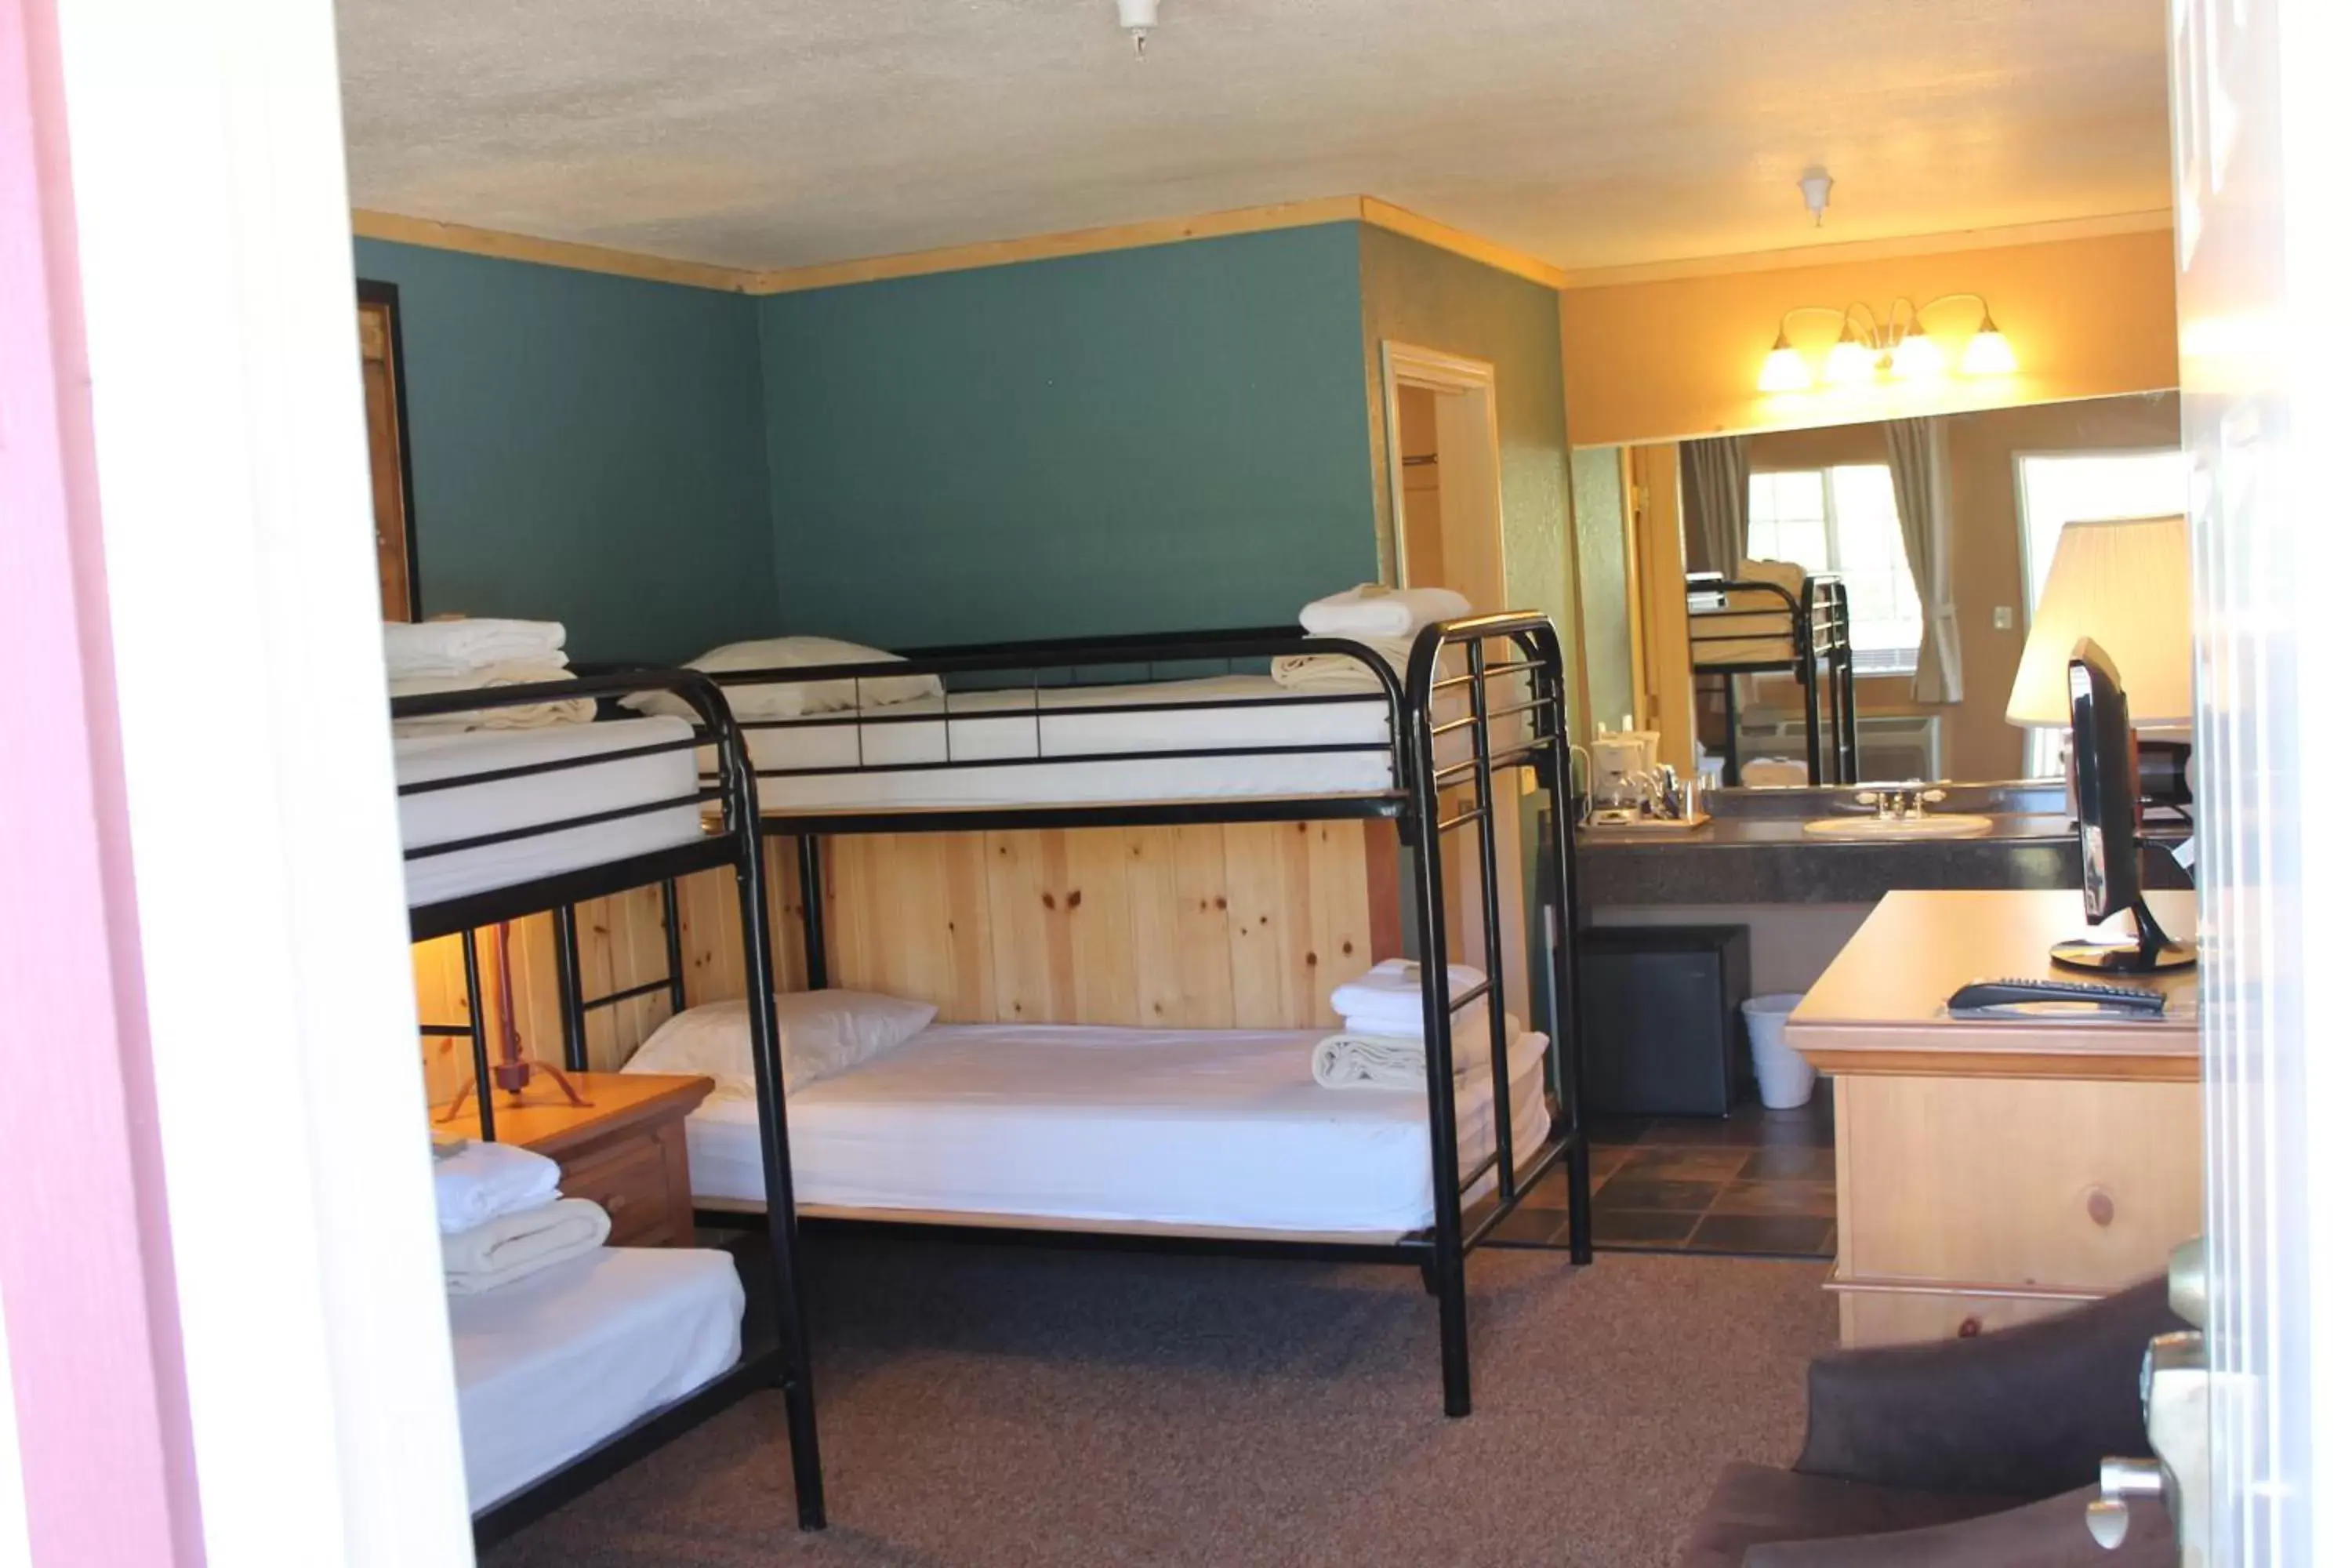 4-Bed Private Dormitory Room with Private Bathroom in Whitney Portal Hotel And Hostel